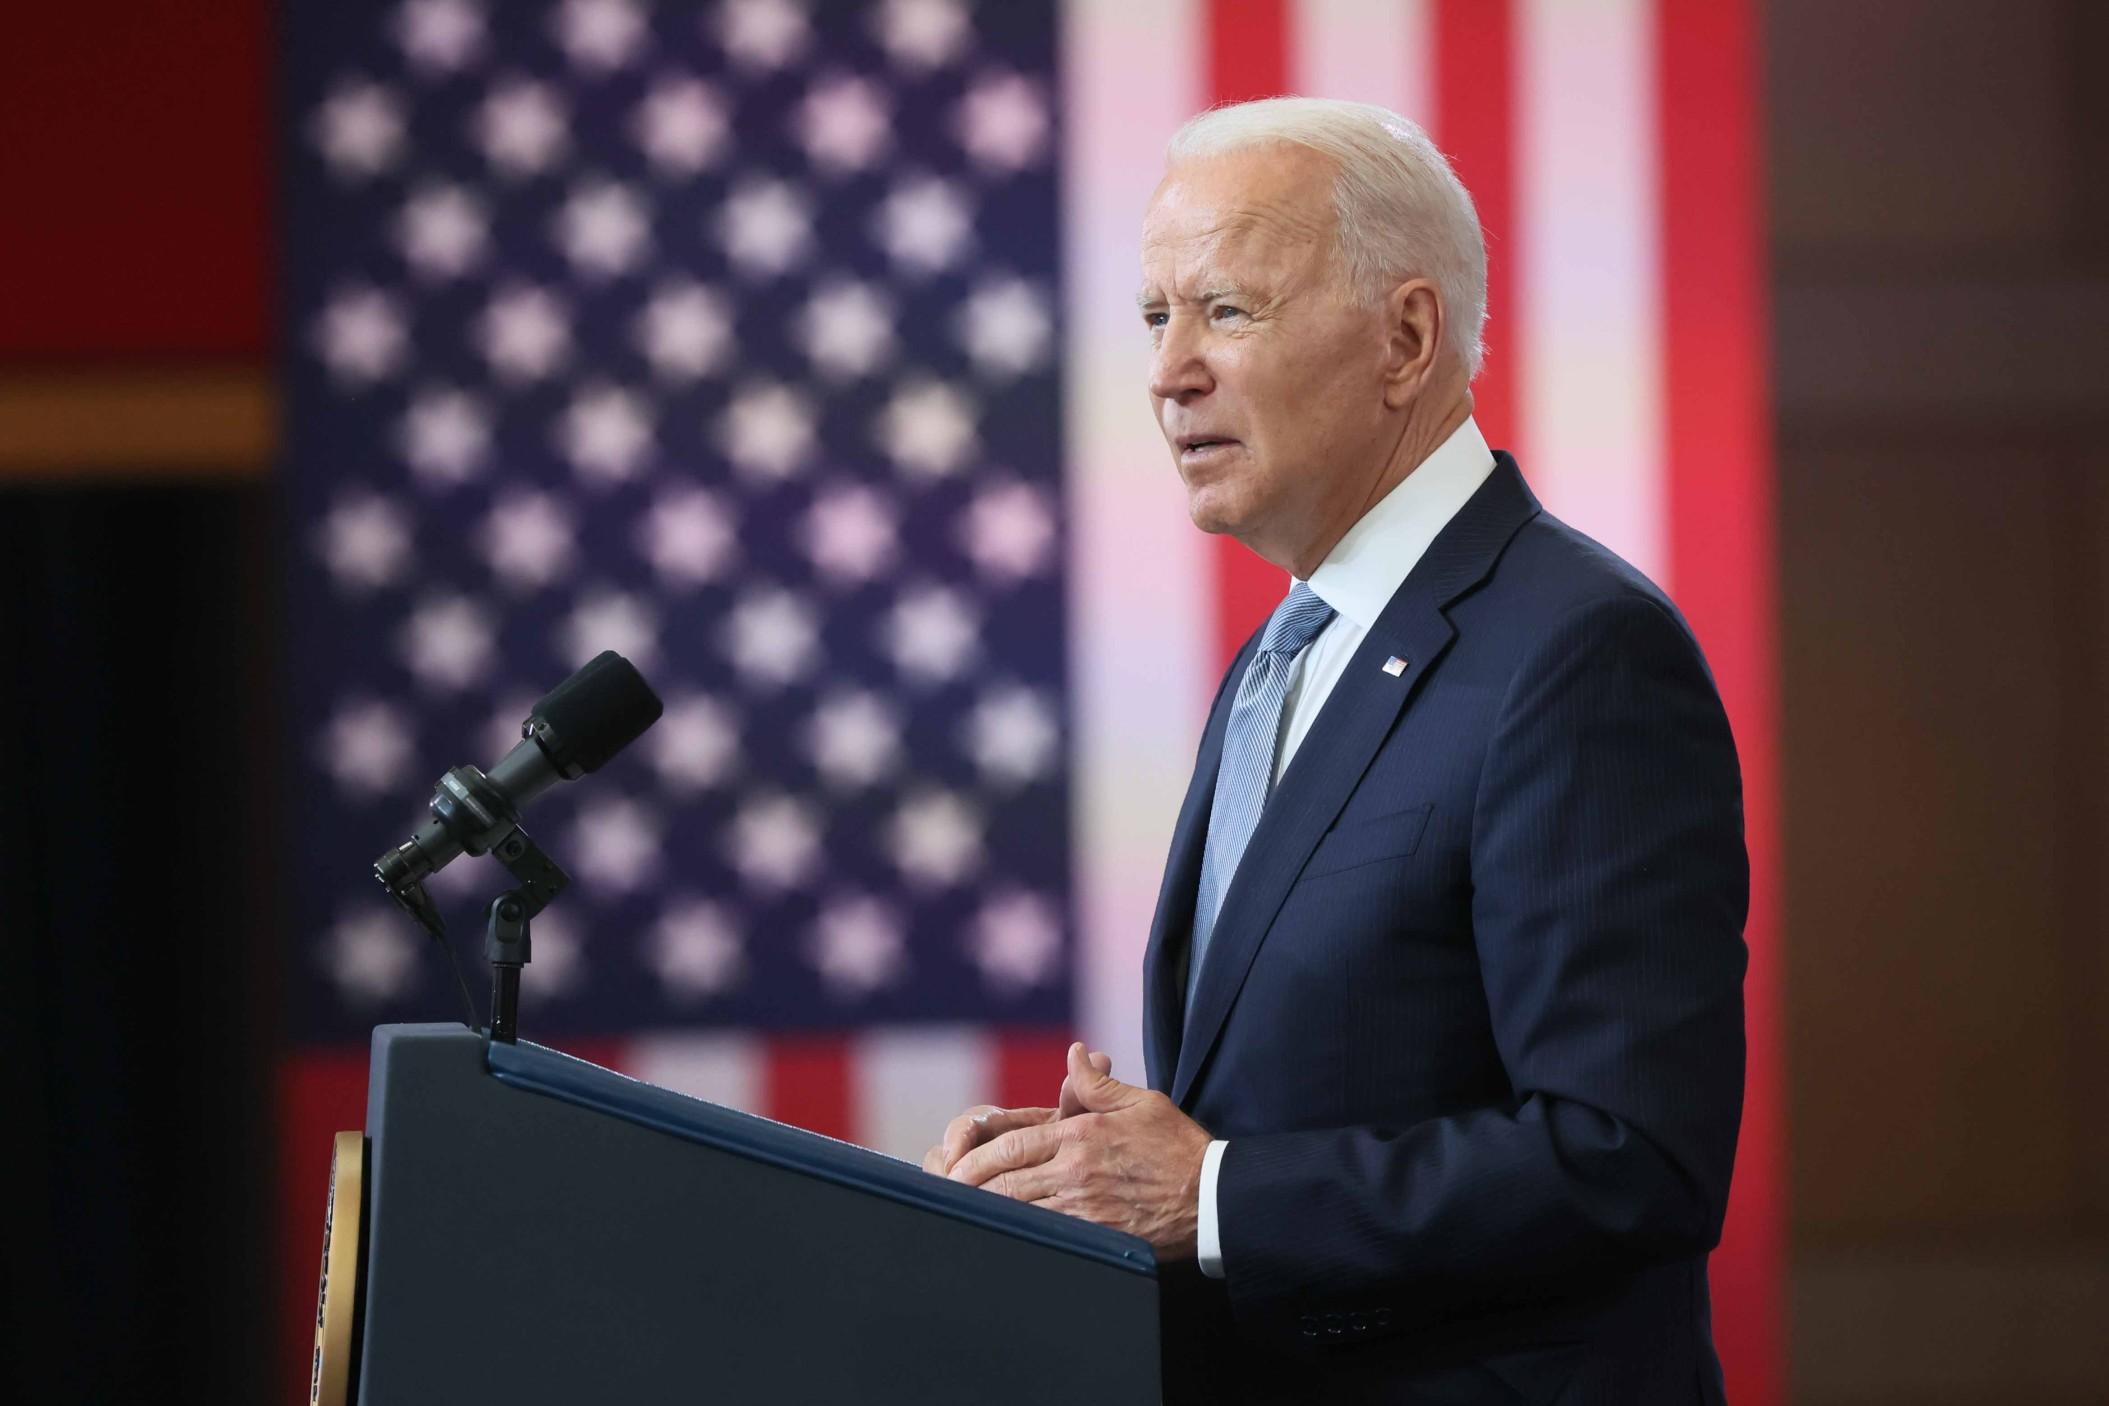 Joe Biden has called for stricter rules around emissions to help push for wider adoption of EVs.